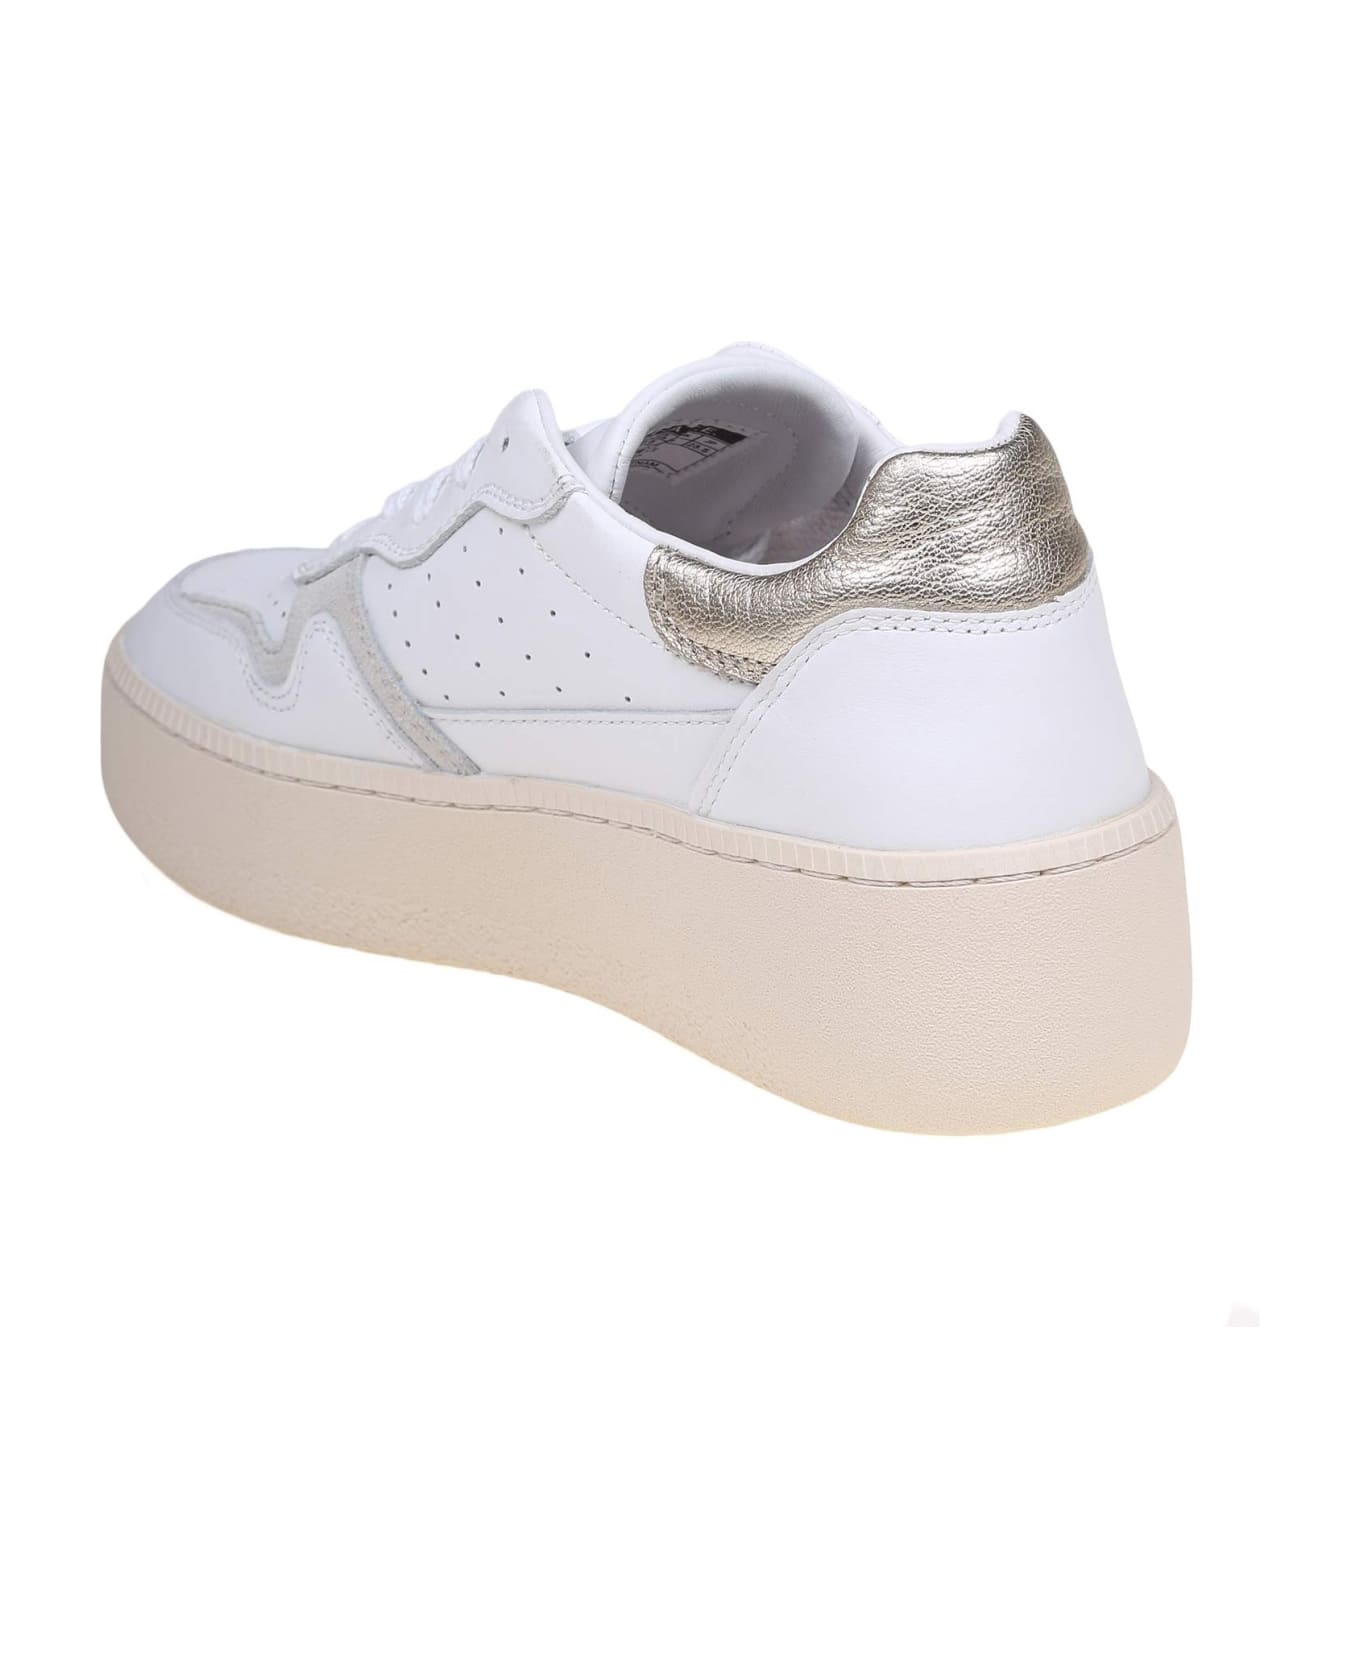 D.A.T.E. Step Sneakers In White Leather - platinum ウェッジシューズ